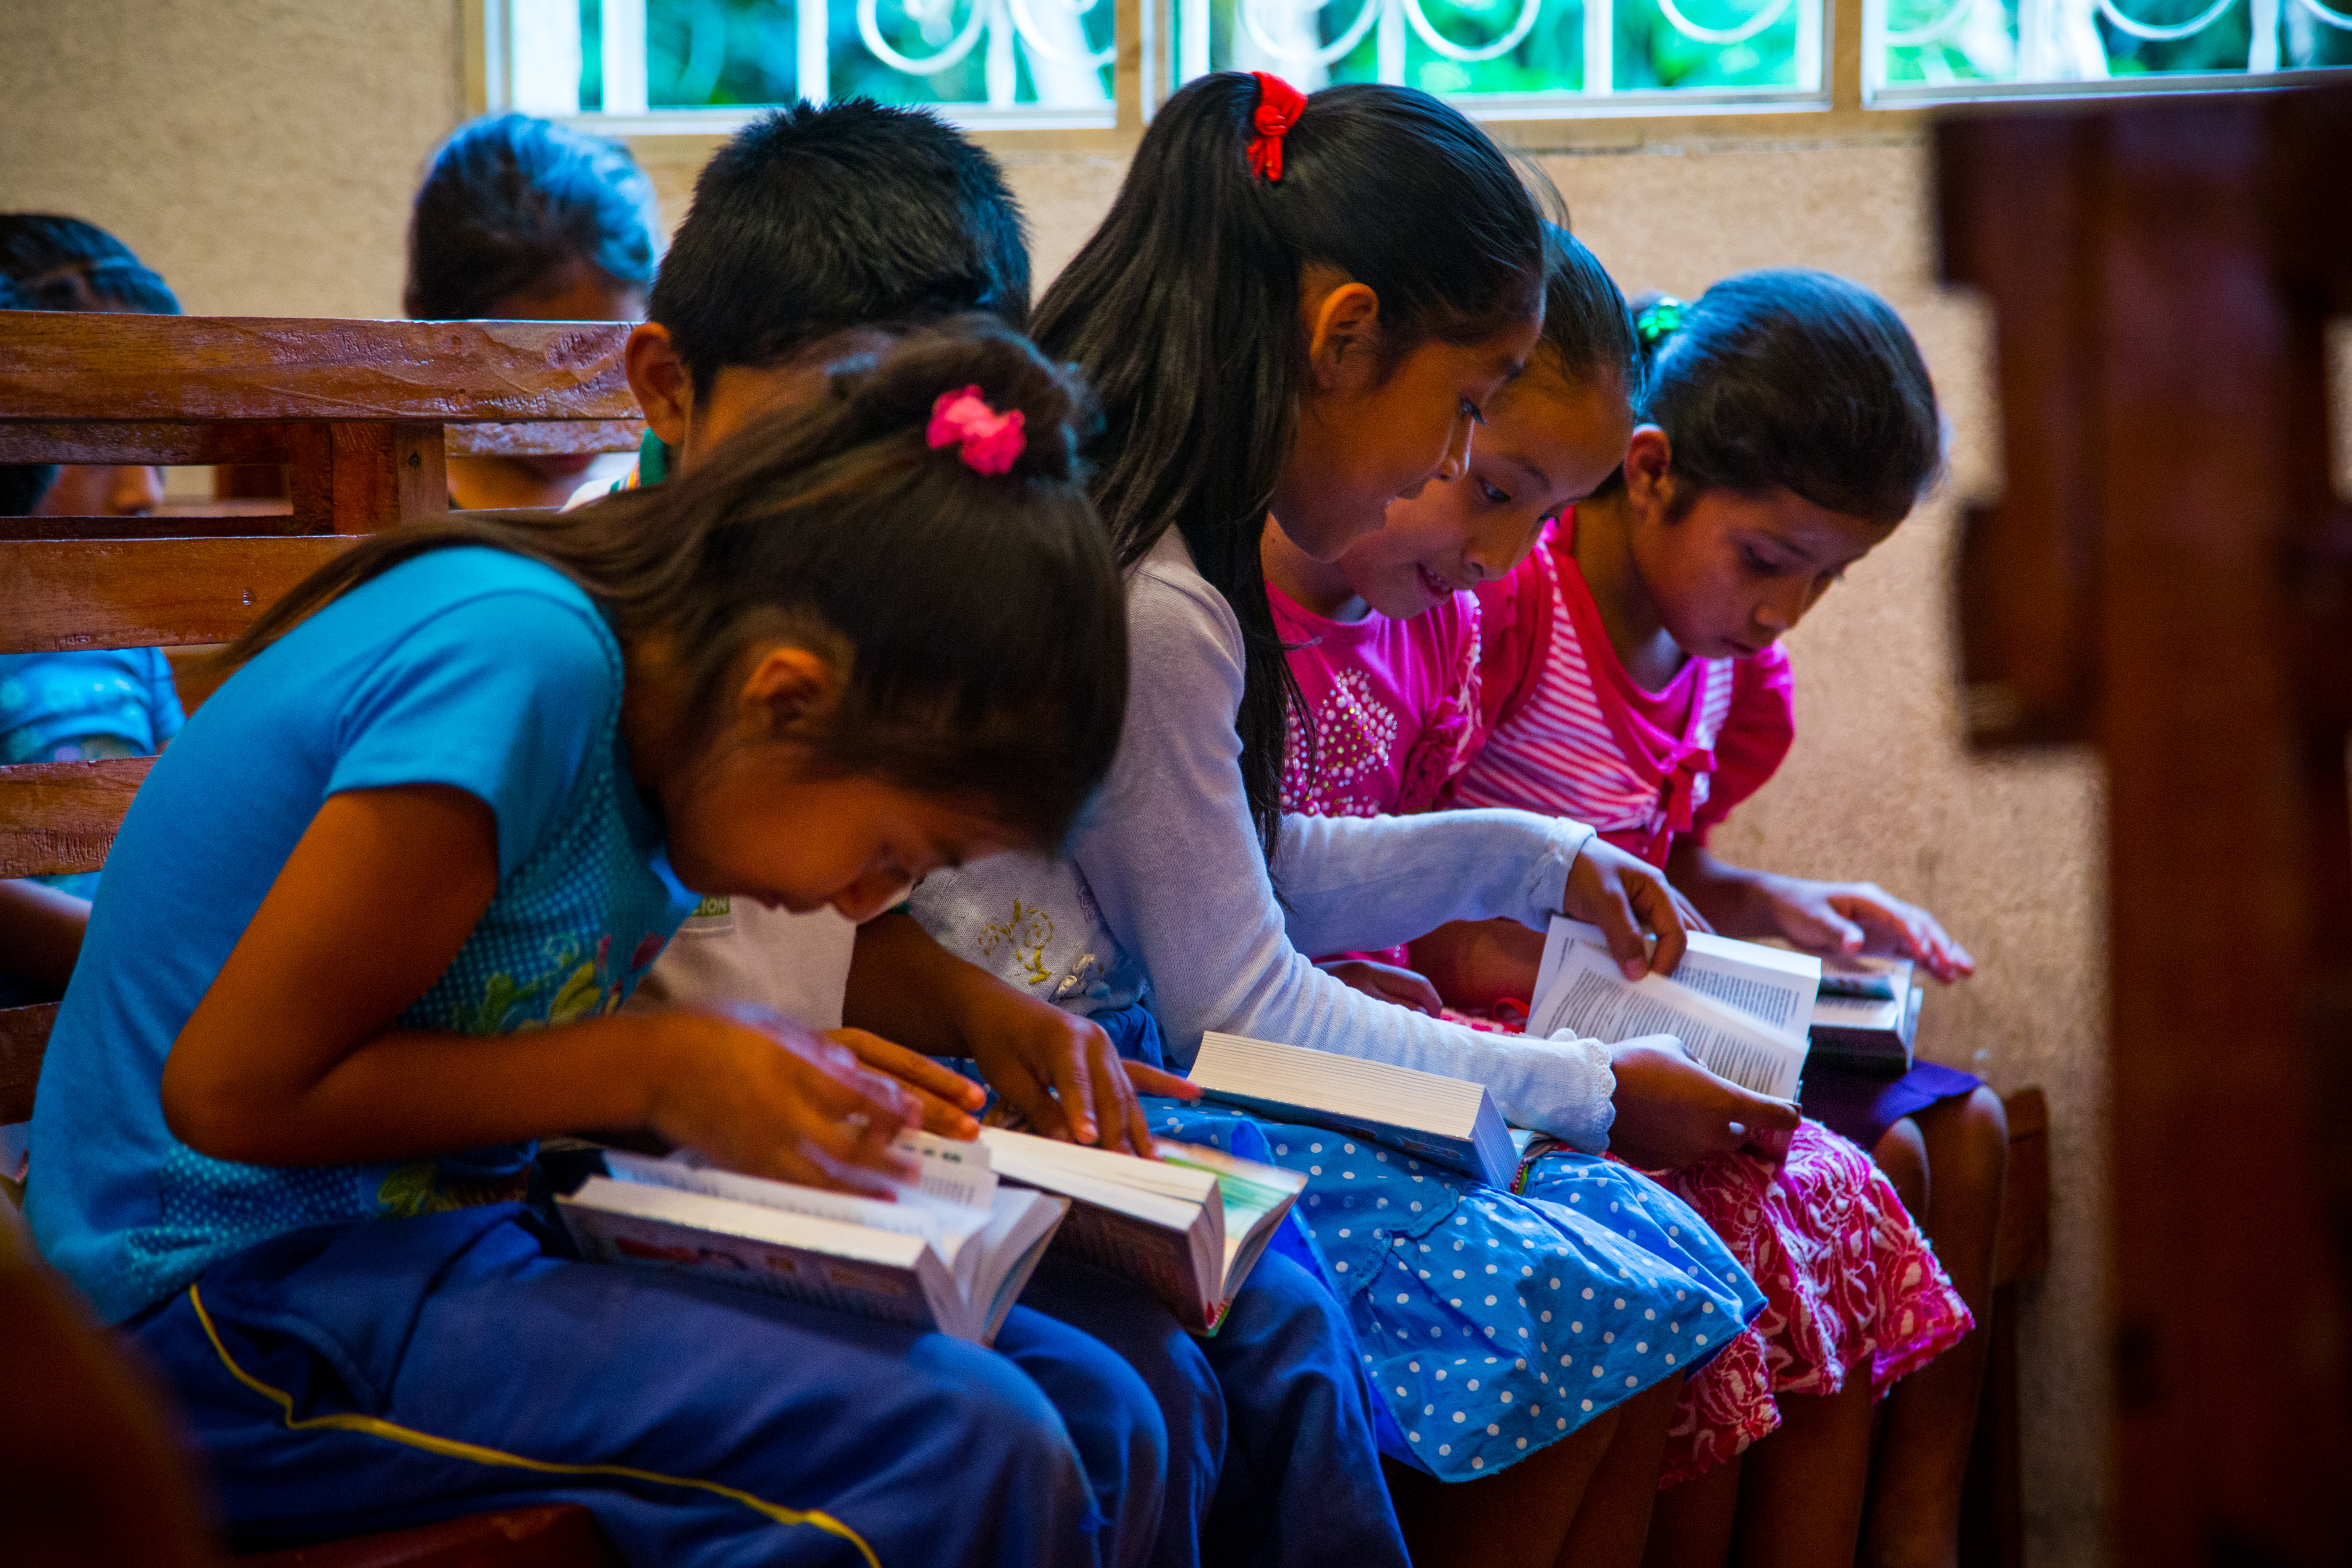 Girls at the project reading their new Bibles